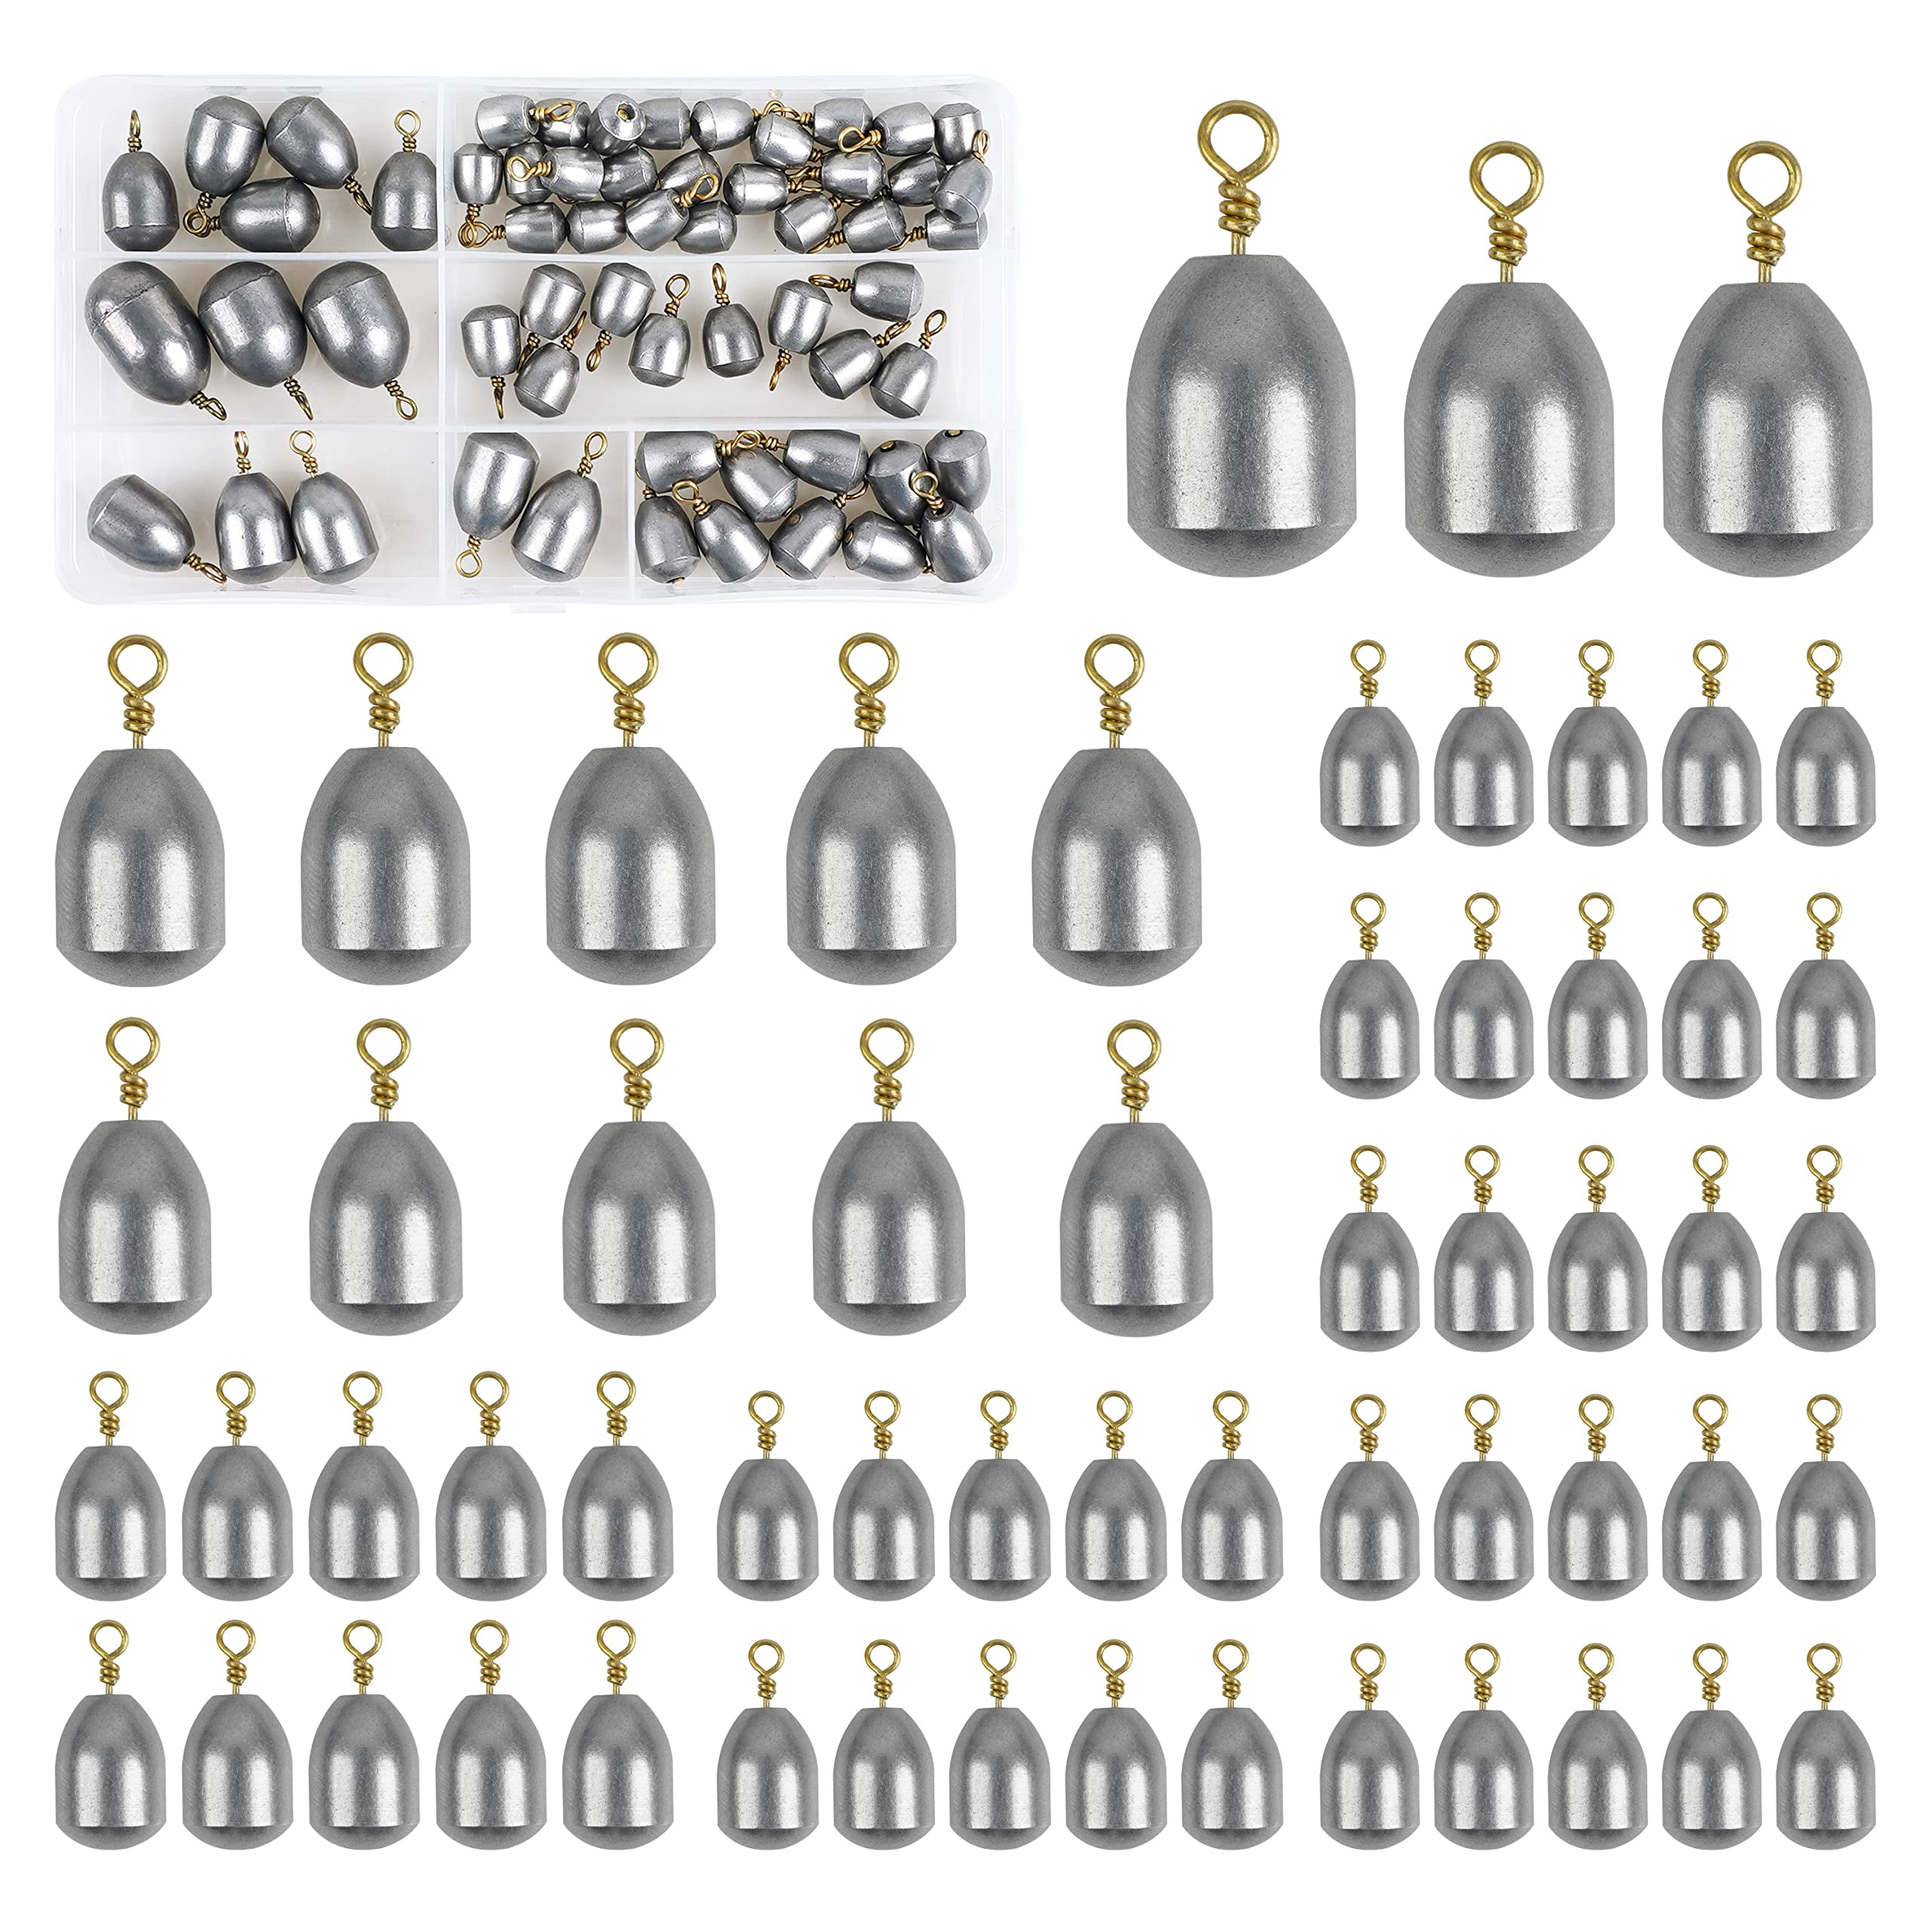 Iron Fishing Weights Kit, 58pcs Assorted Bass Casting Weights Bell Sinkers  Water Drop Catfish Weights for Saltwater Freshwater Fishing 